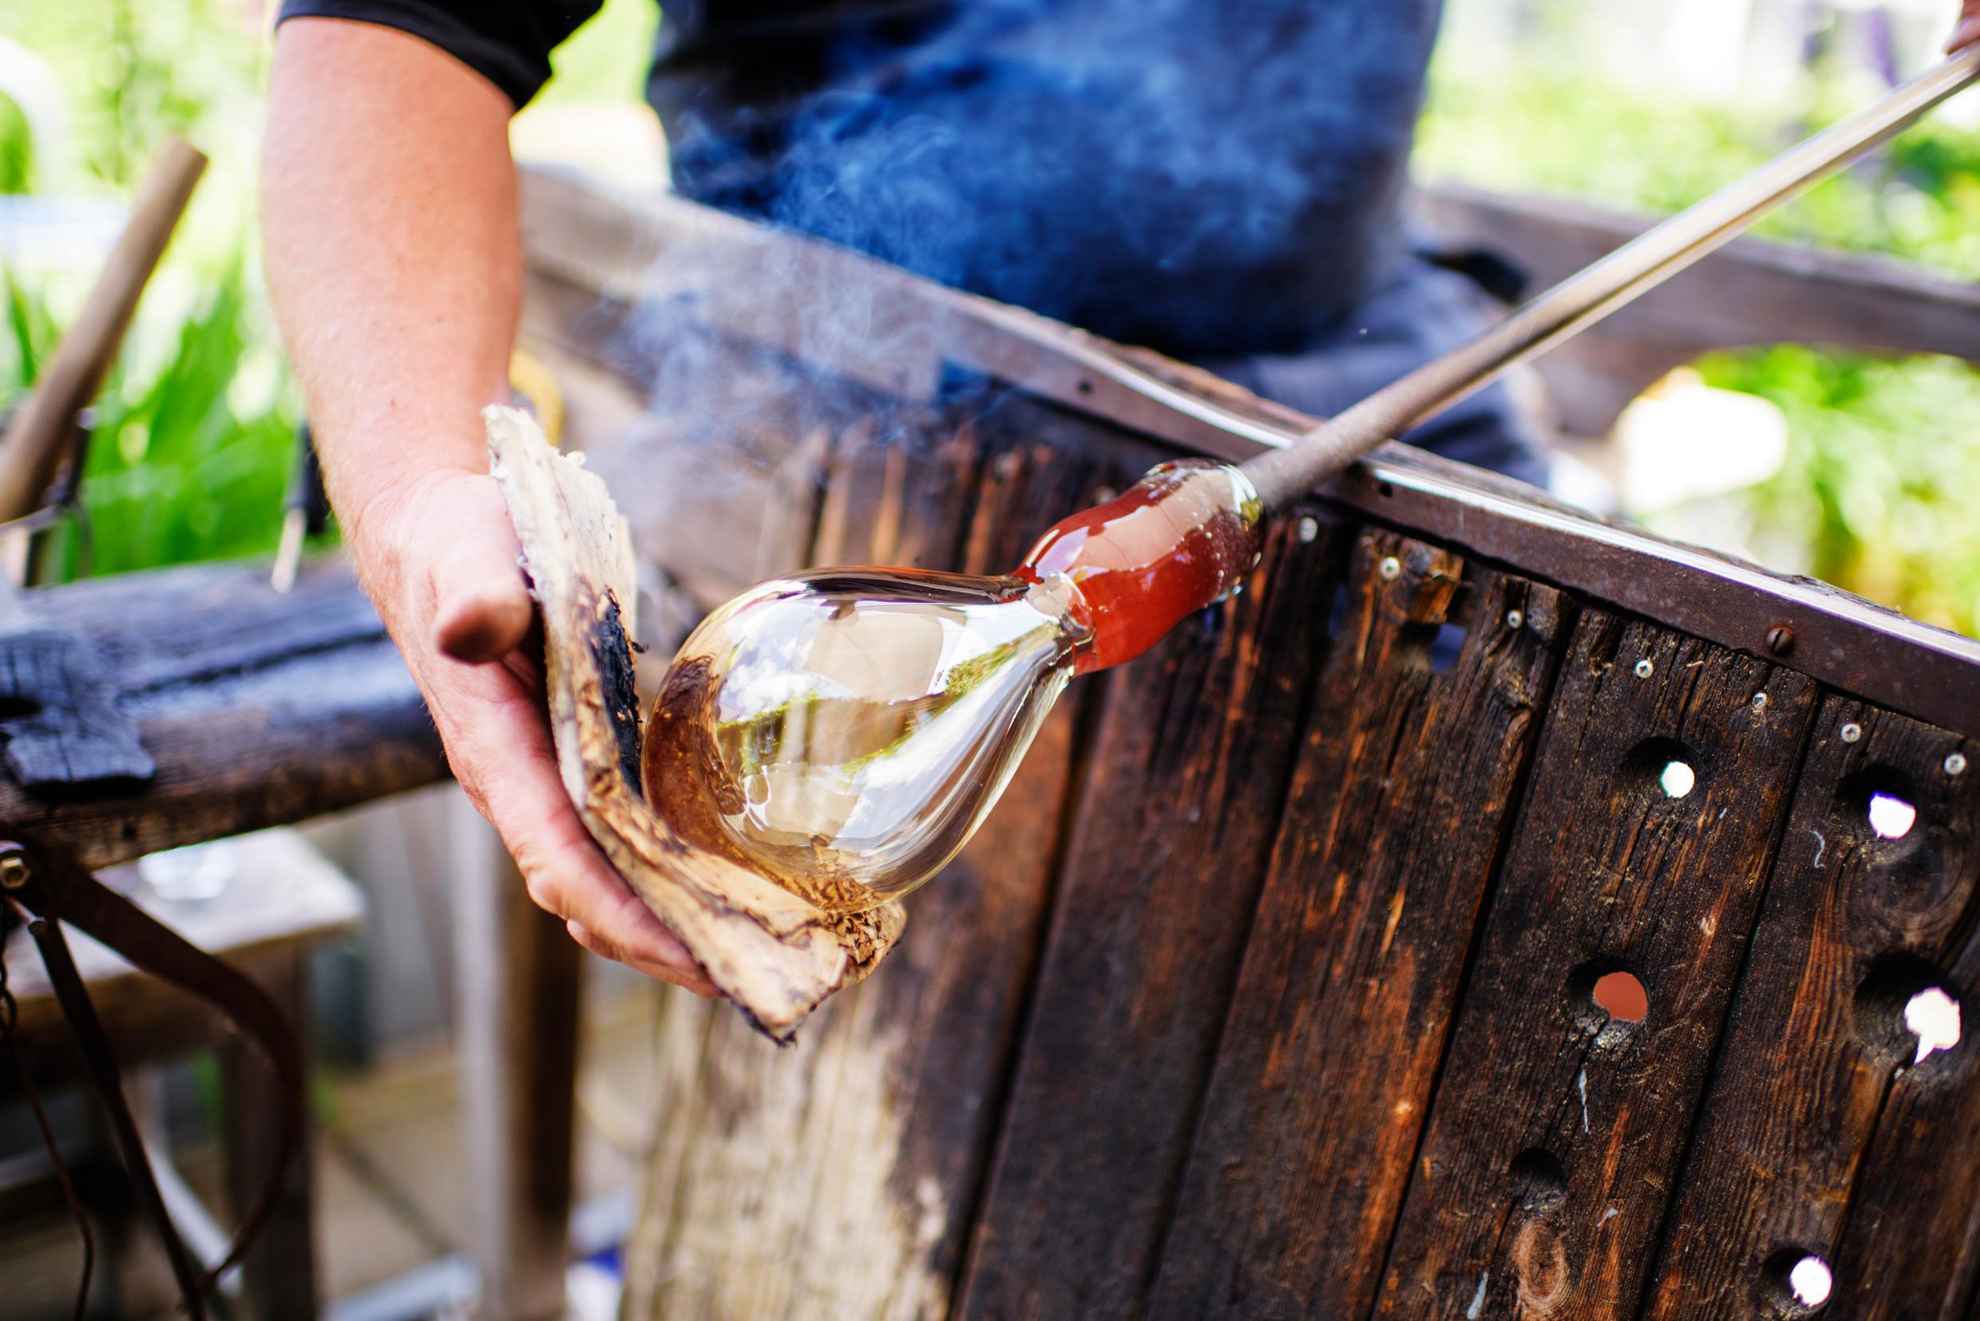 A man in the process of making hand-blown glass outdoors.